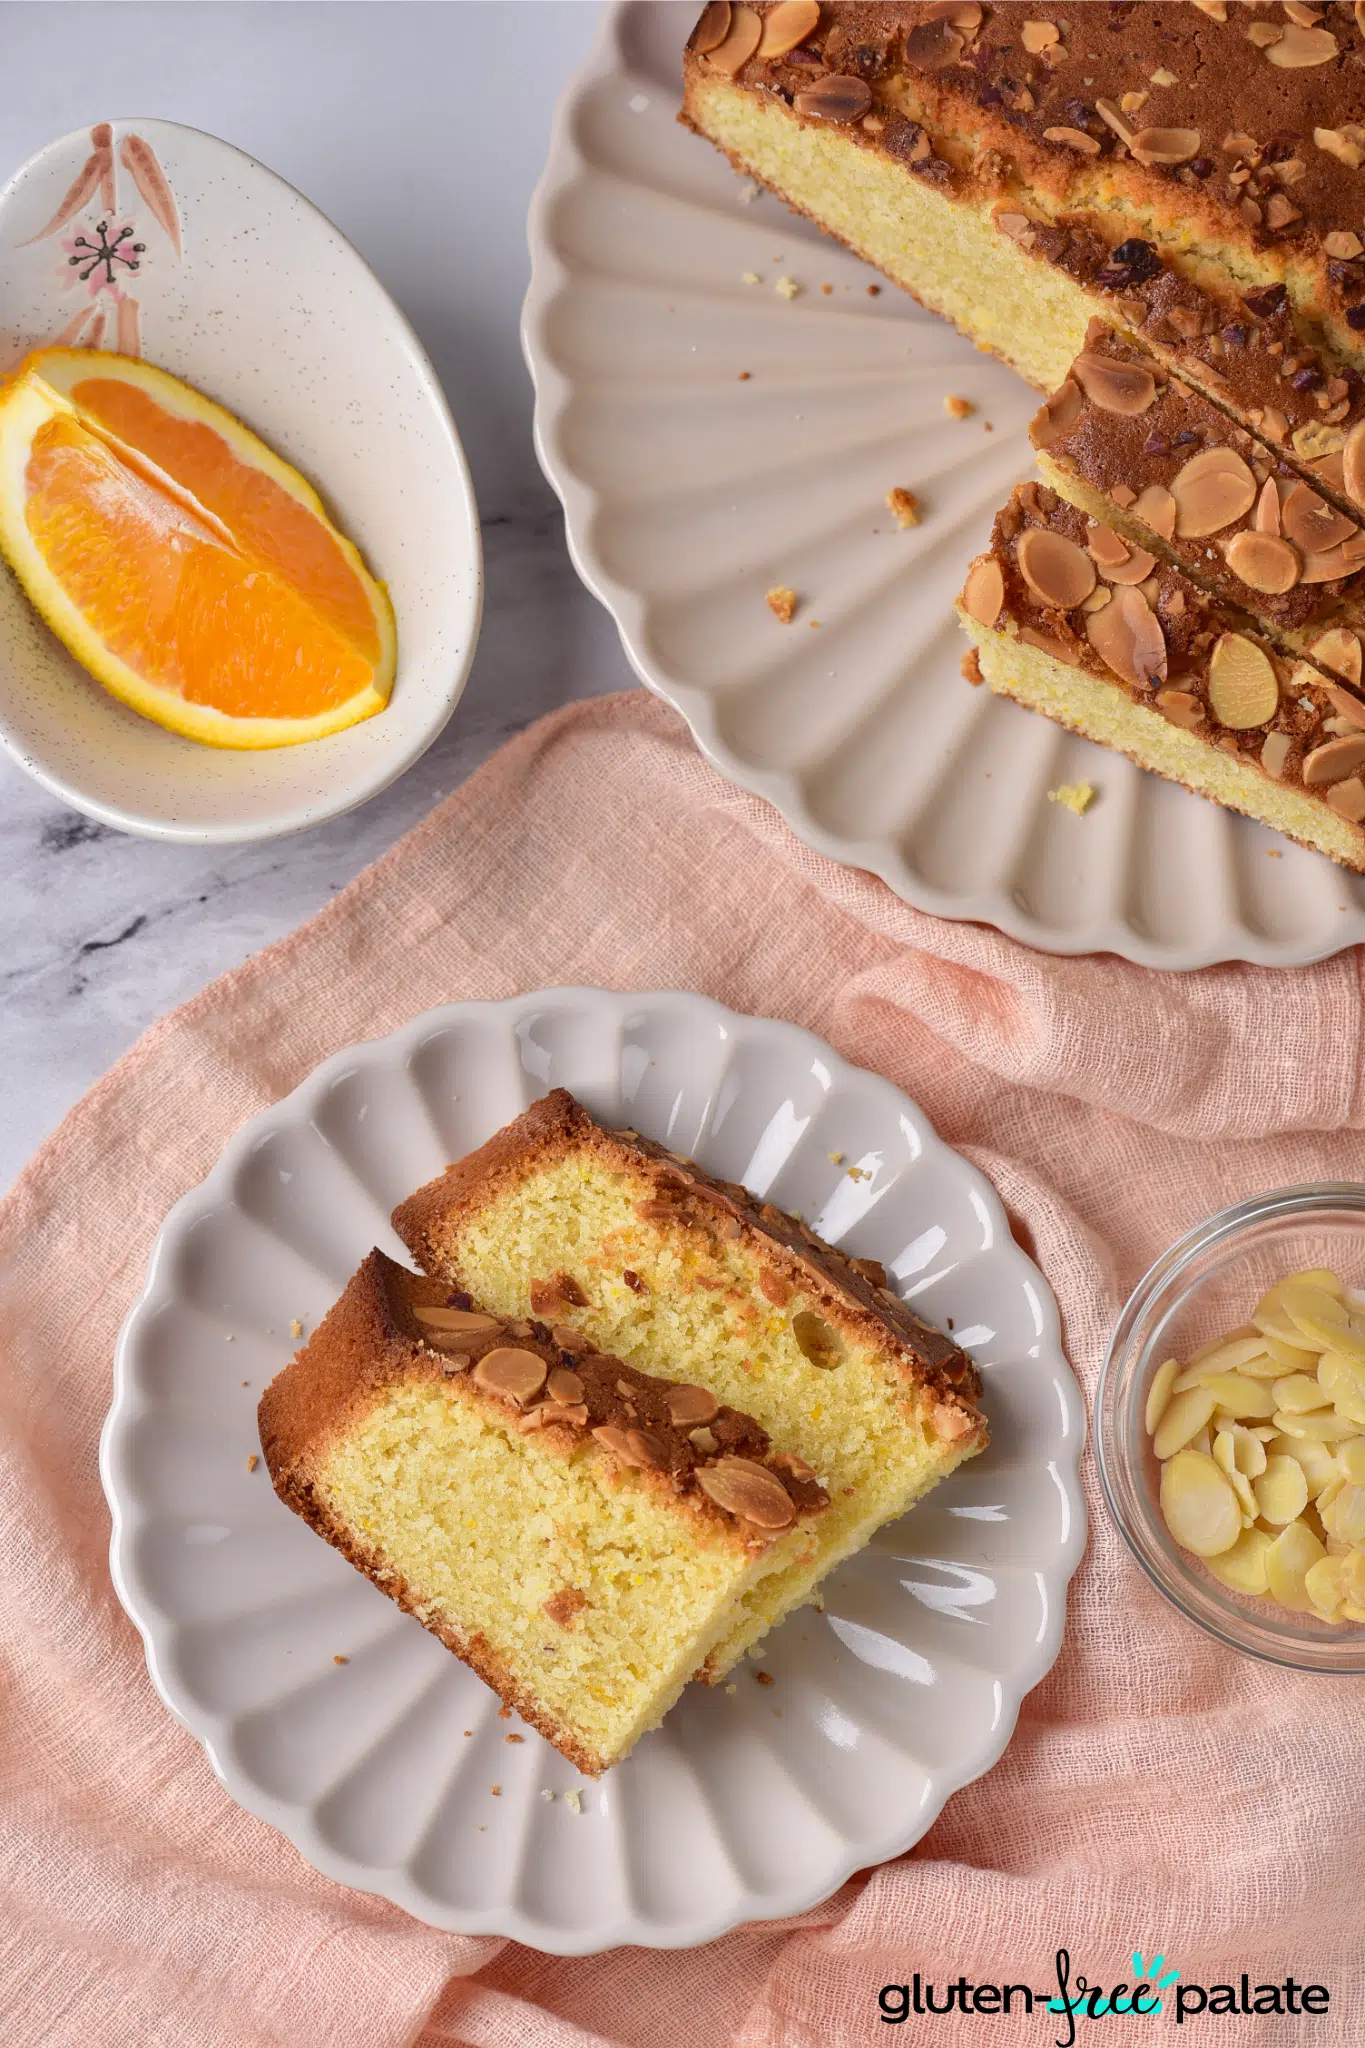 gluten-free almond cake on white cake plate with a side plate serving.